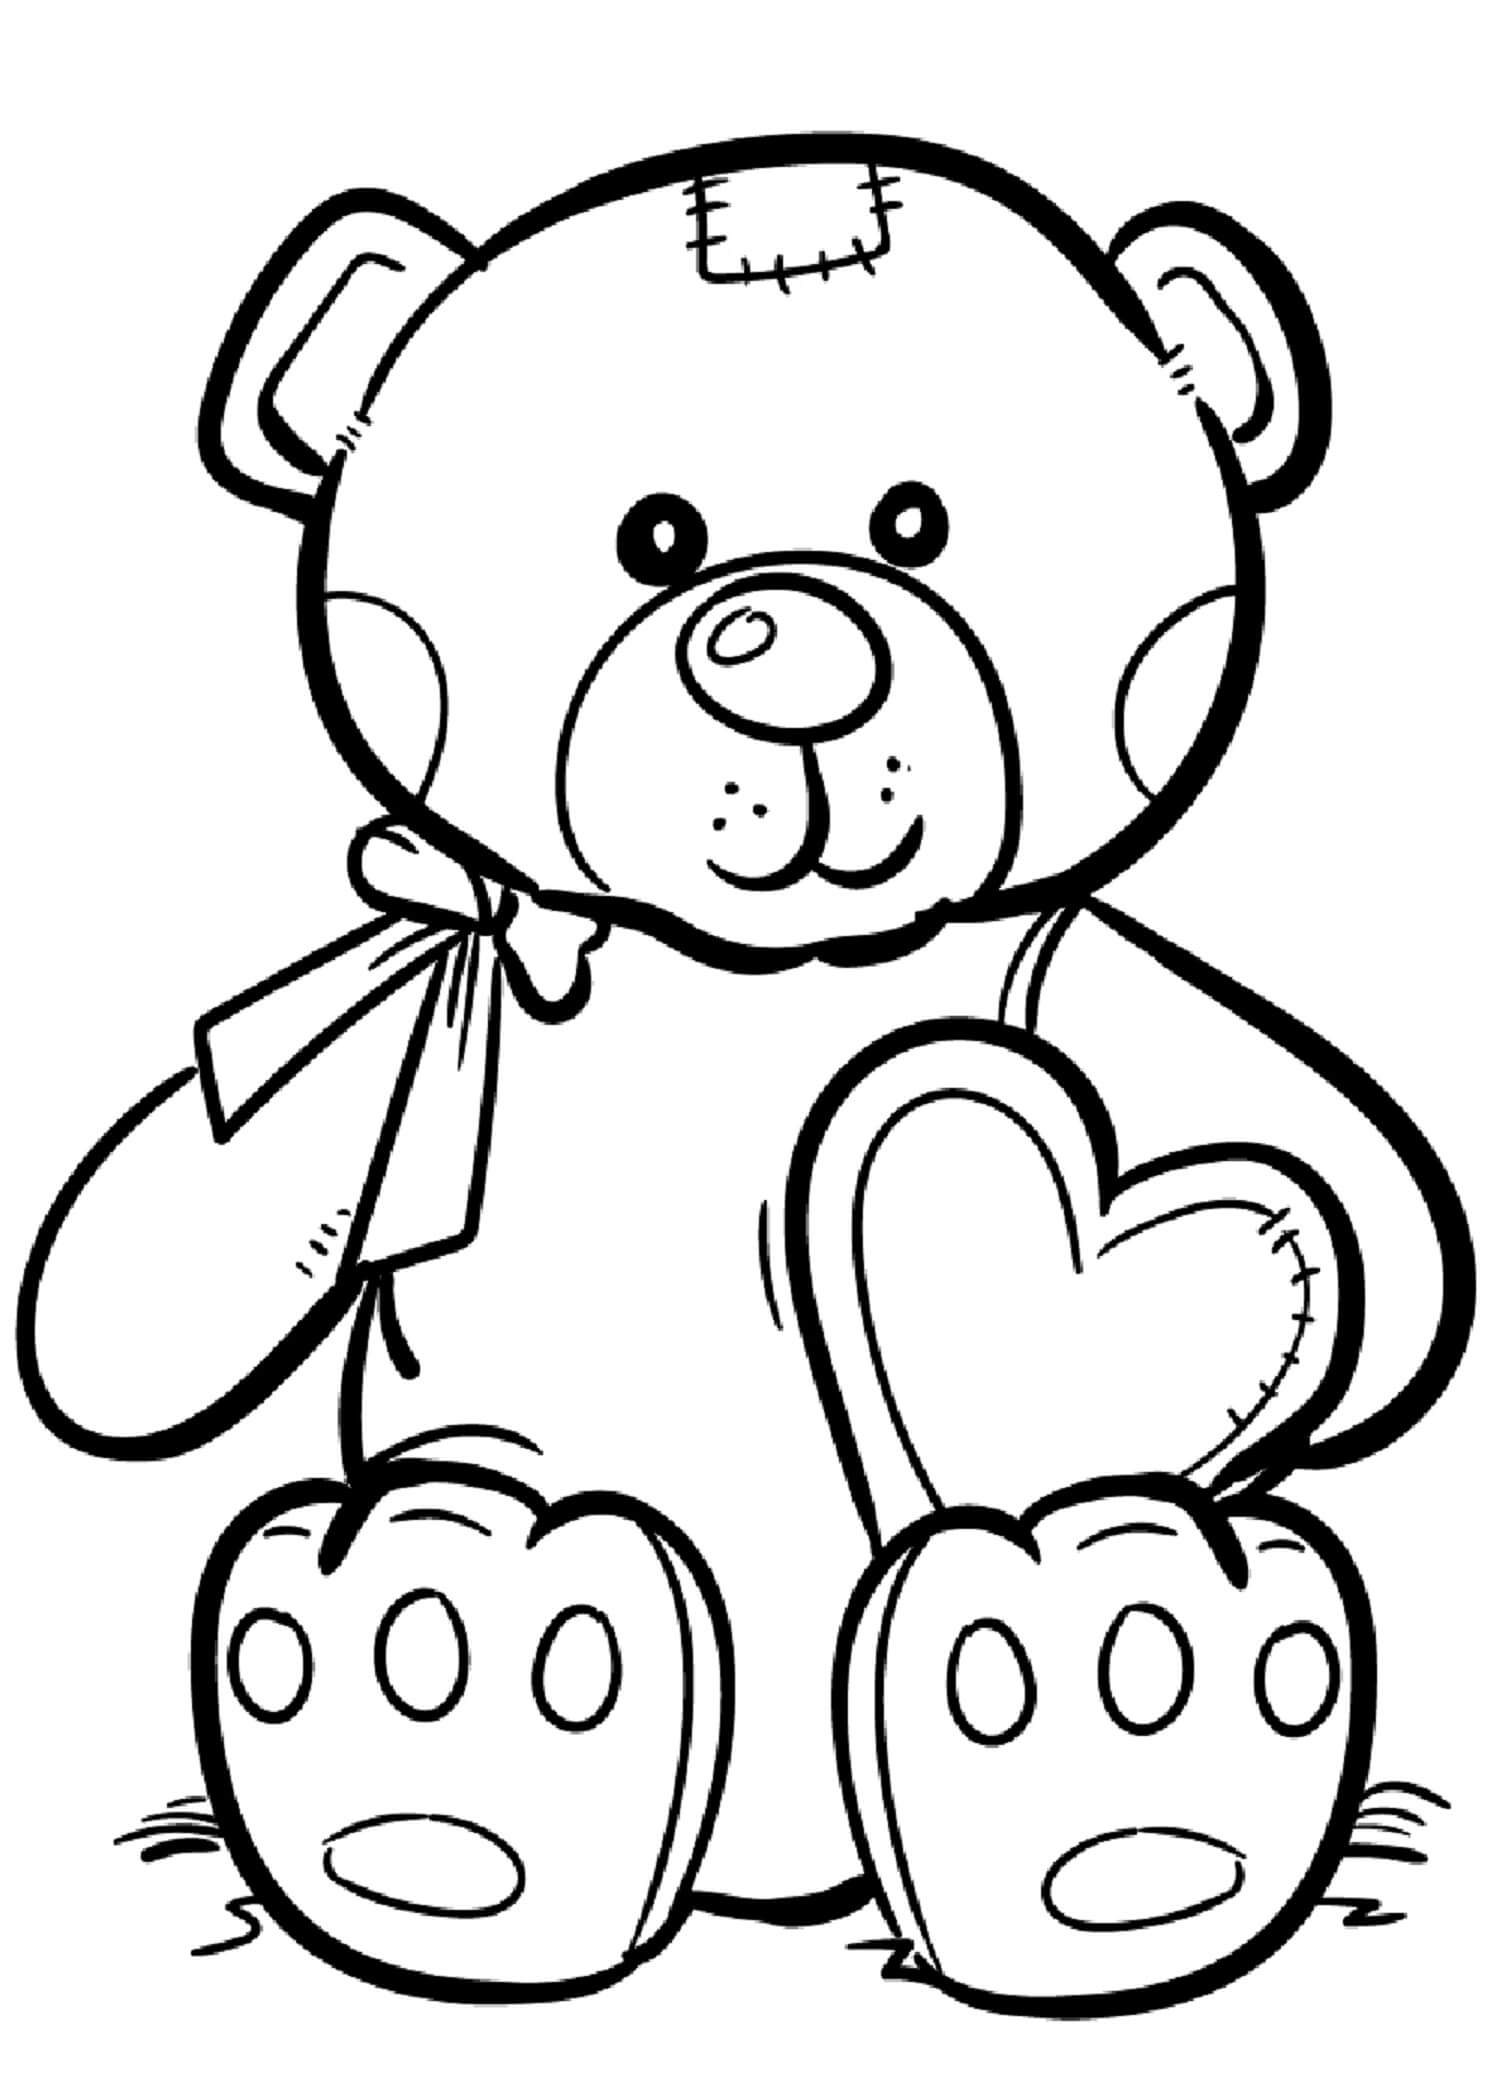 Teddy Bear With Heart Handdrawing Vector Illustration Stock Illustration -  Download Image Now - iStock